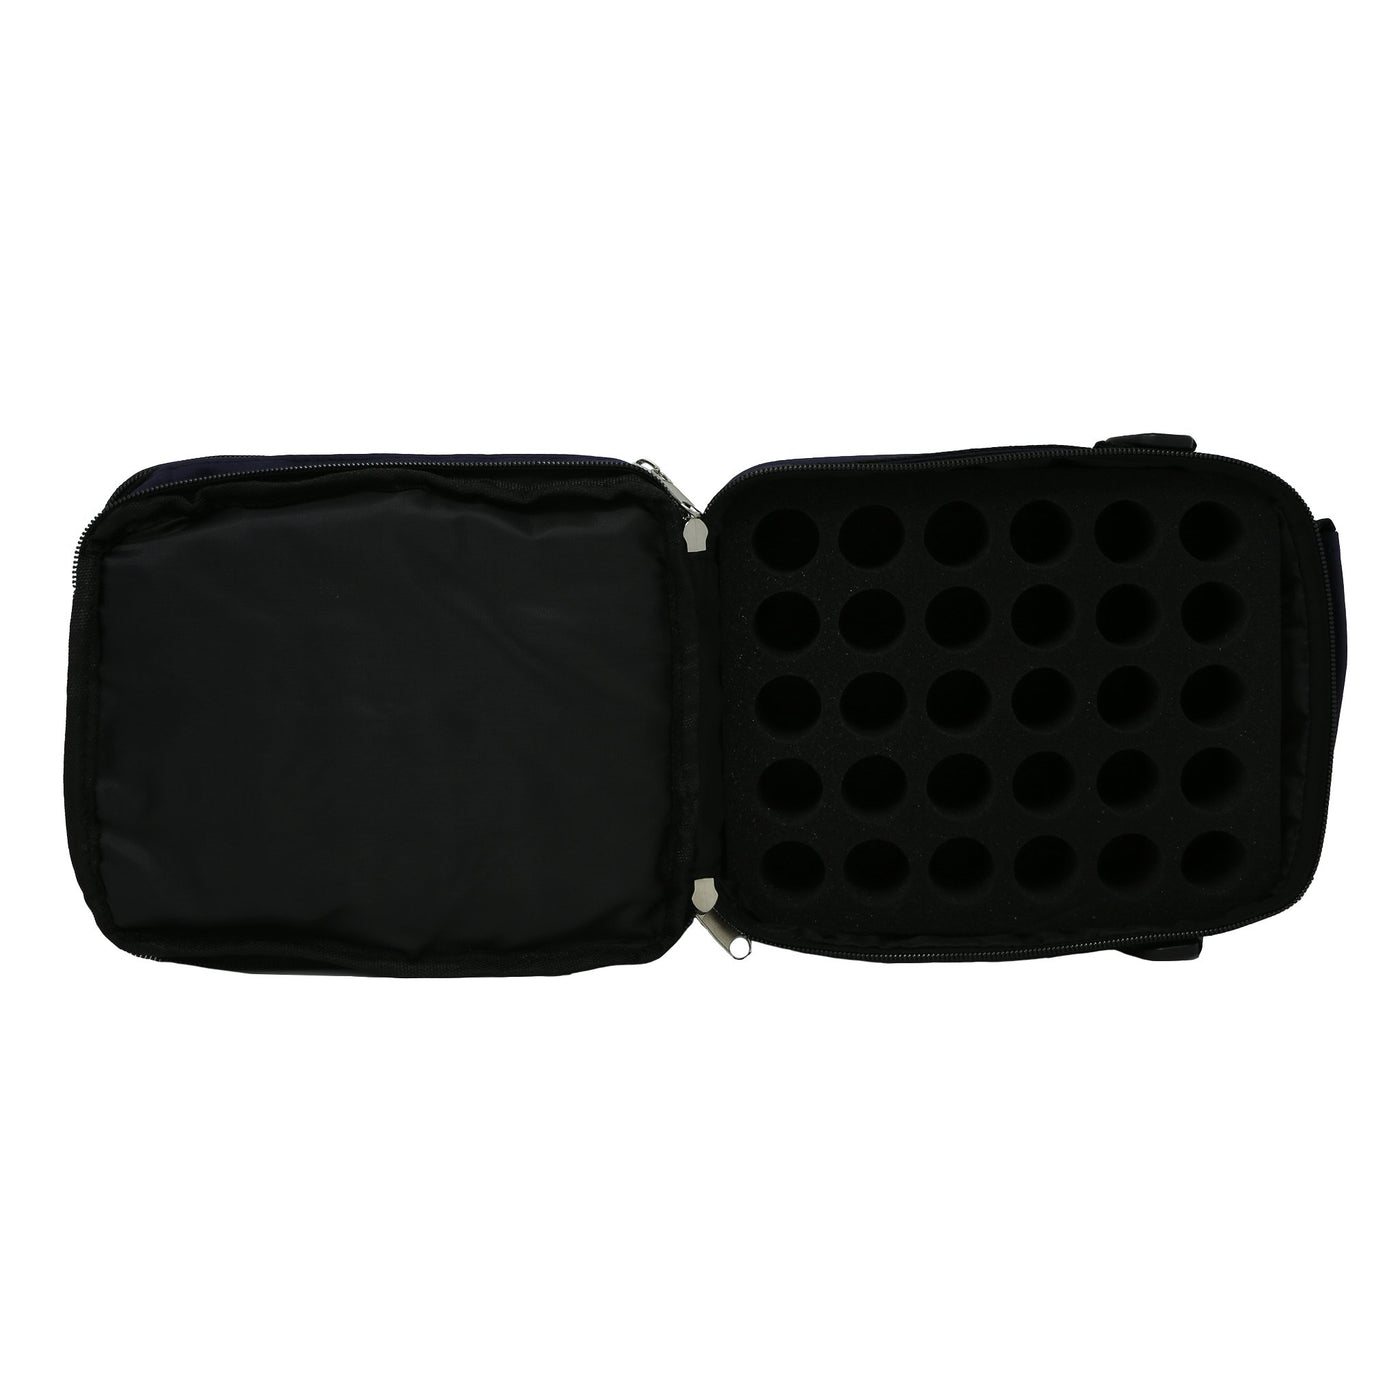 Shoulder Carrying Case - Oil Life Canada - Canada's Best Essential Oil Supplies